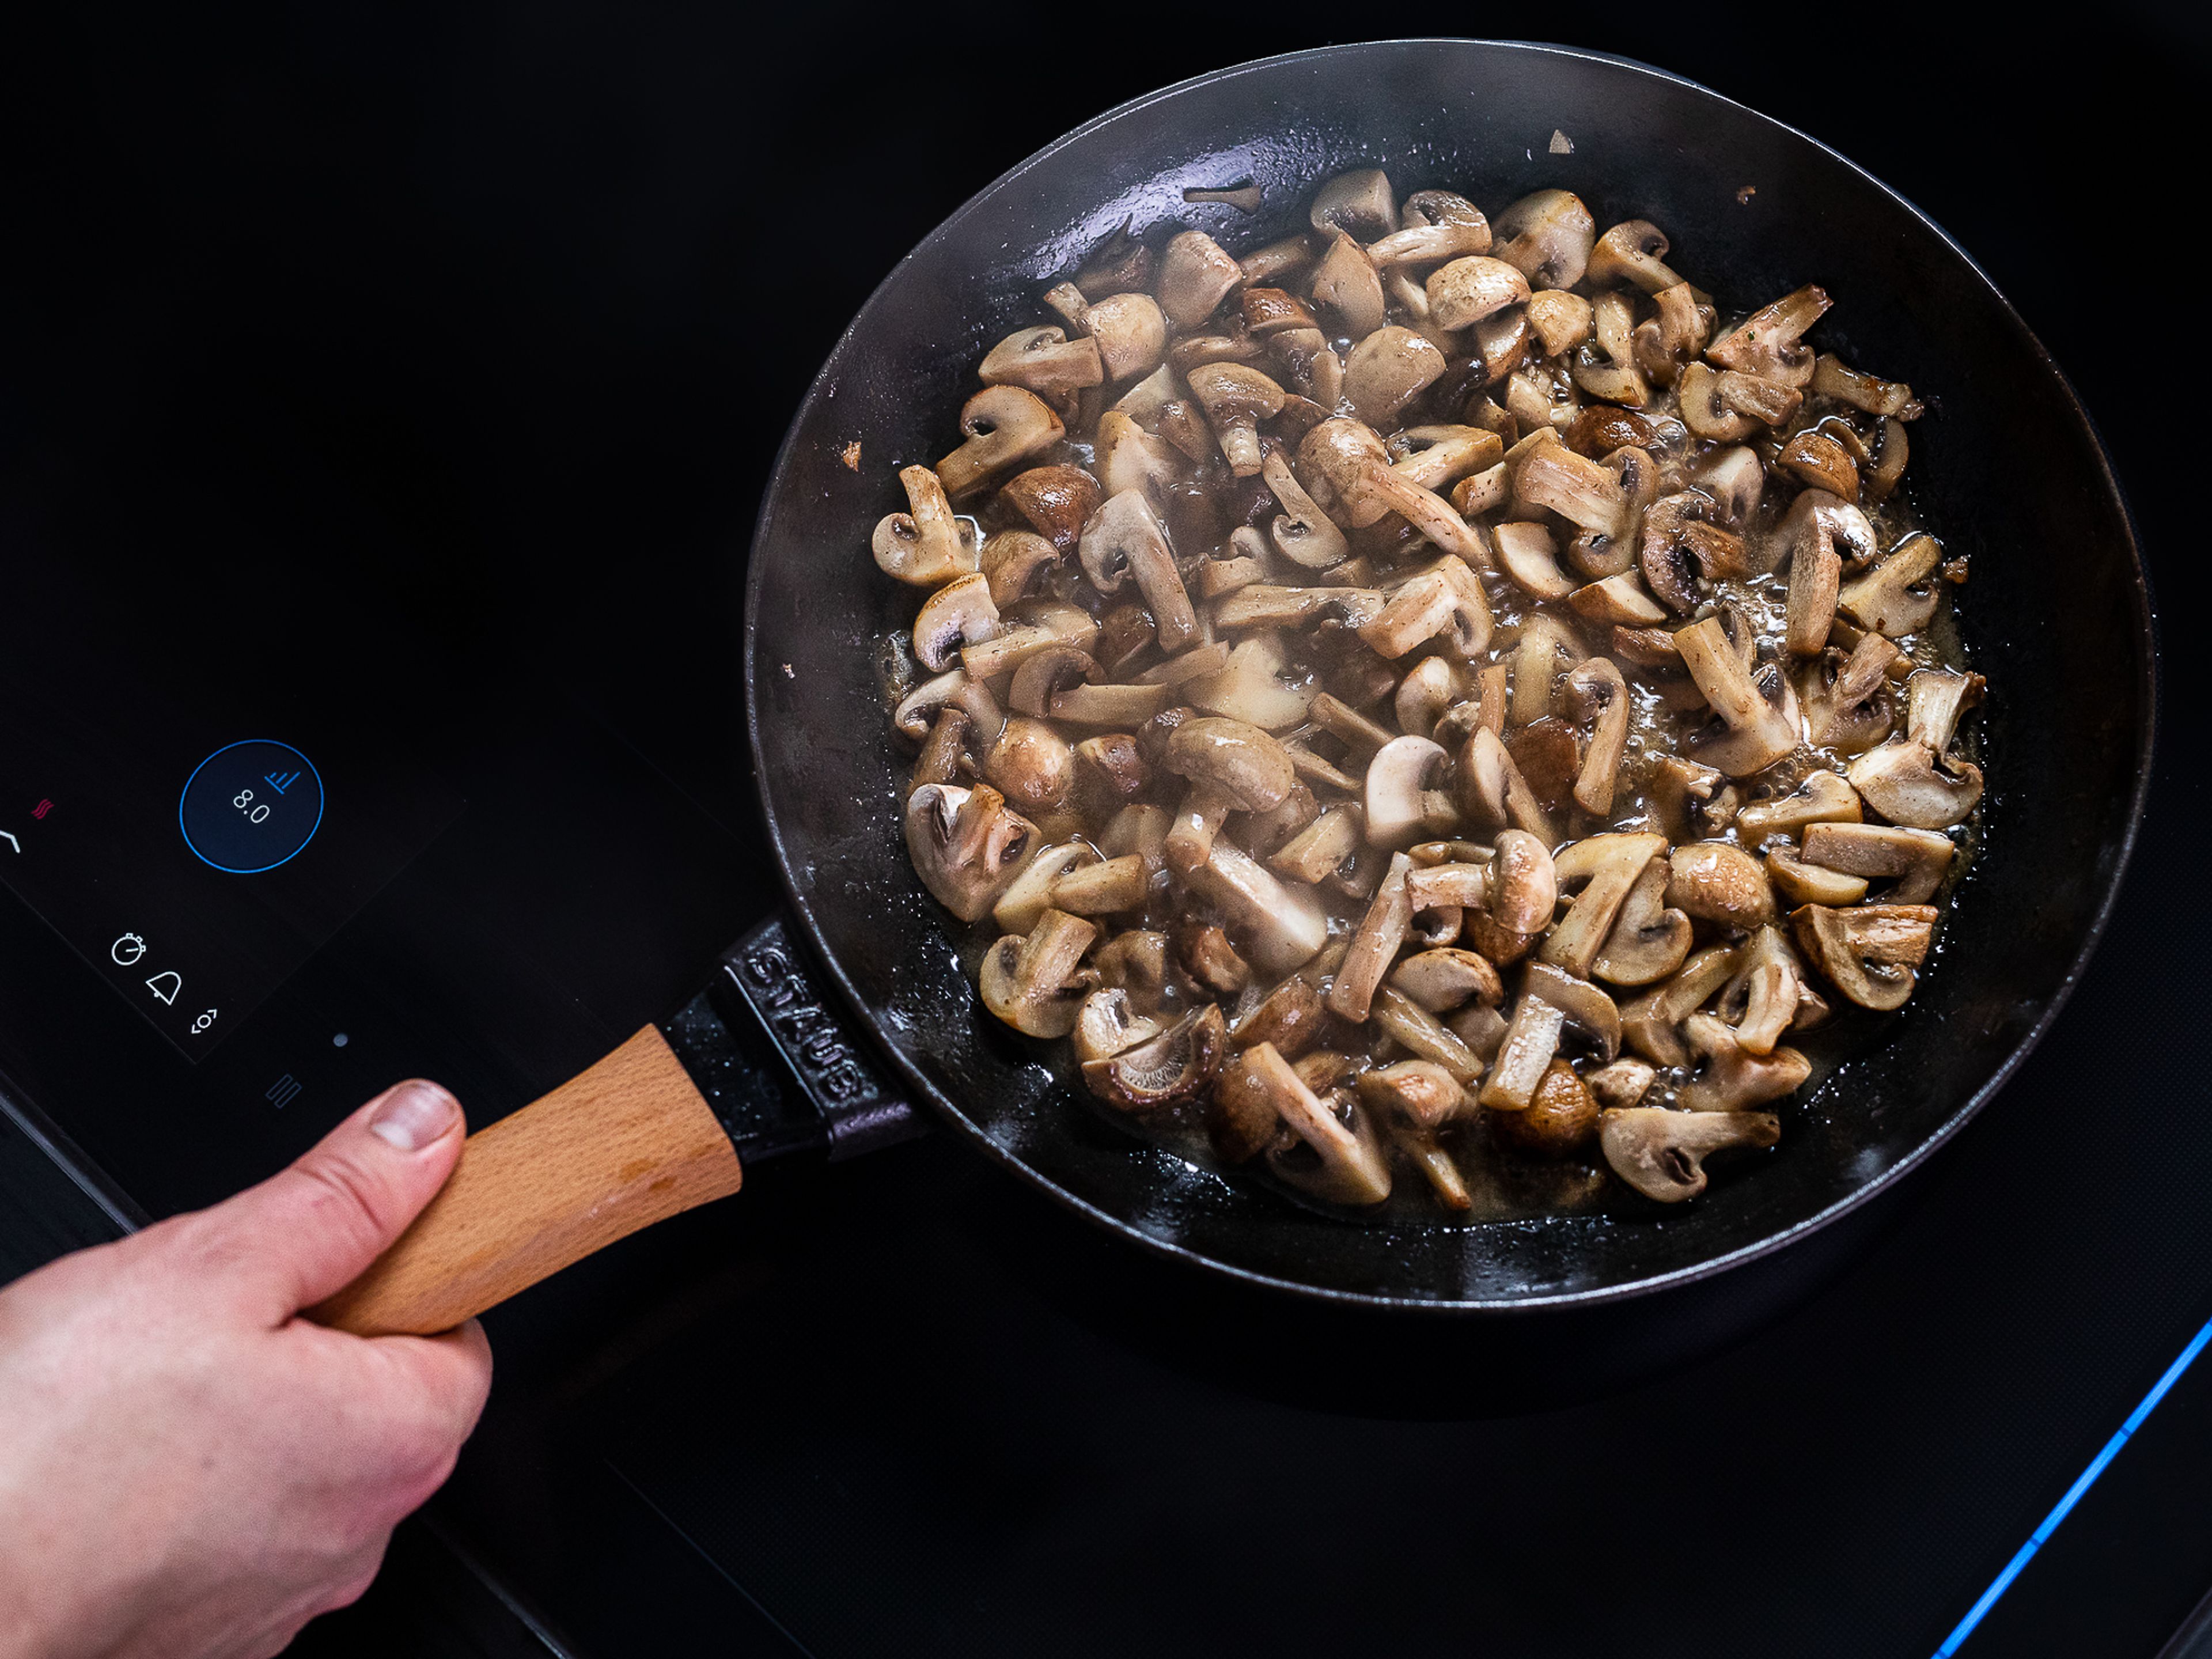 Add mixed mushrooms and sliced garlic to the same pan, and cook until mushrooms are nicely browned. Add flour and let cook for approx. 1 min longer, or until flour is browned. Add more olive oil if the pan looks dry.